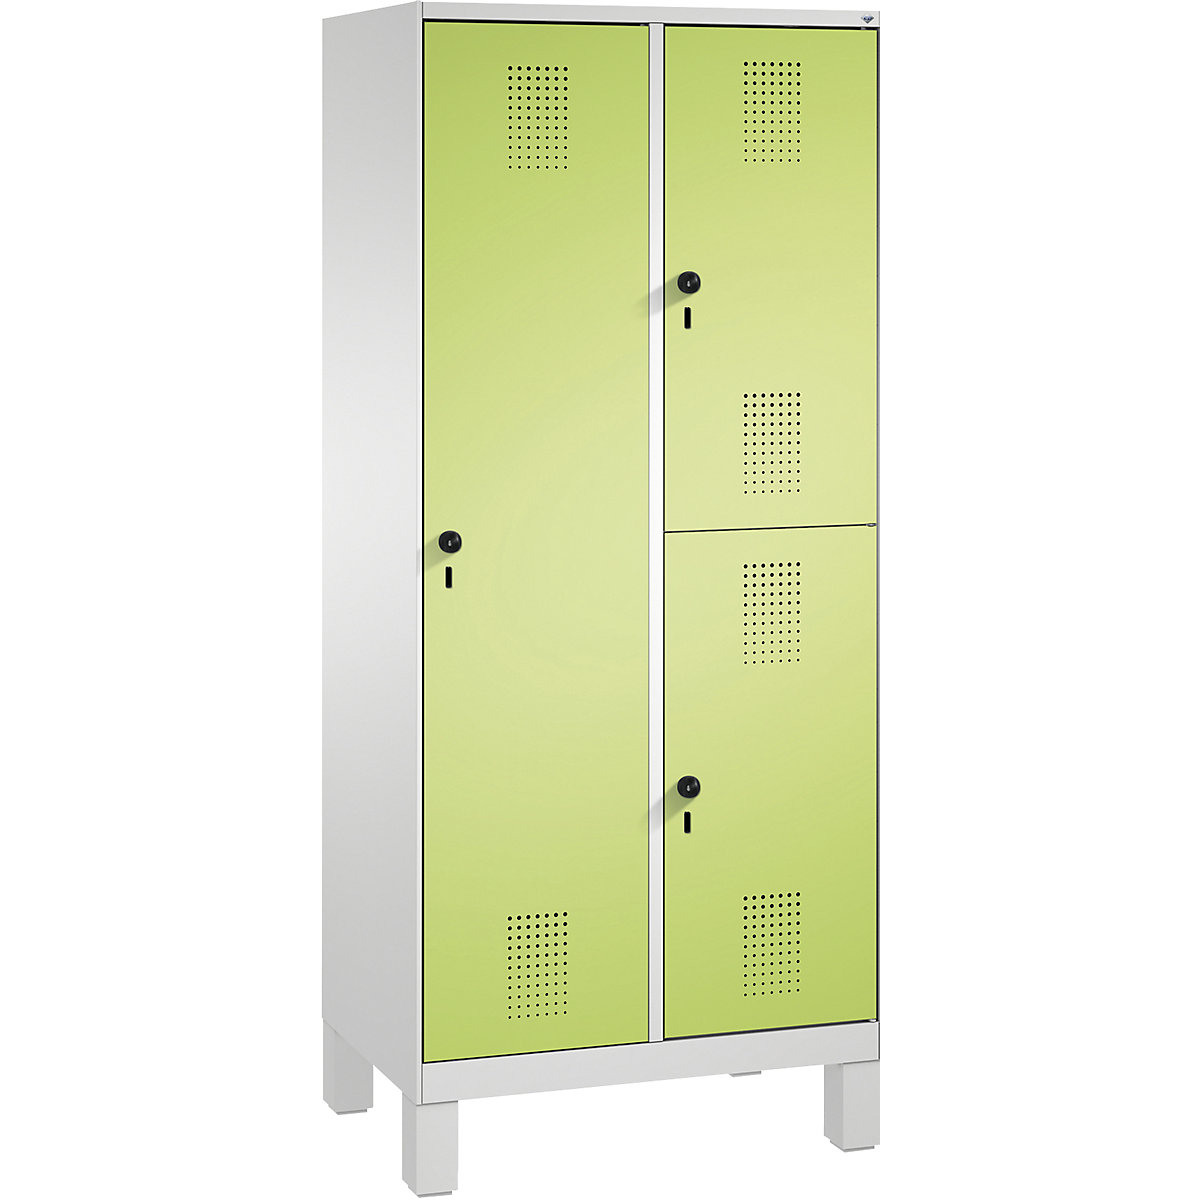 EVOLO combination cupboard, single and double tier – C+P, 2 compartments, 3 doors, compartment width 400 mm, with feet, light grey / viridian green